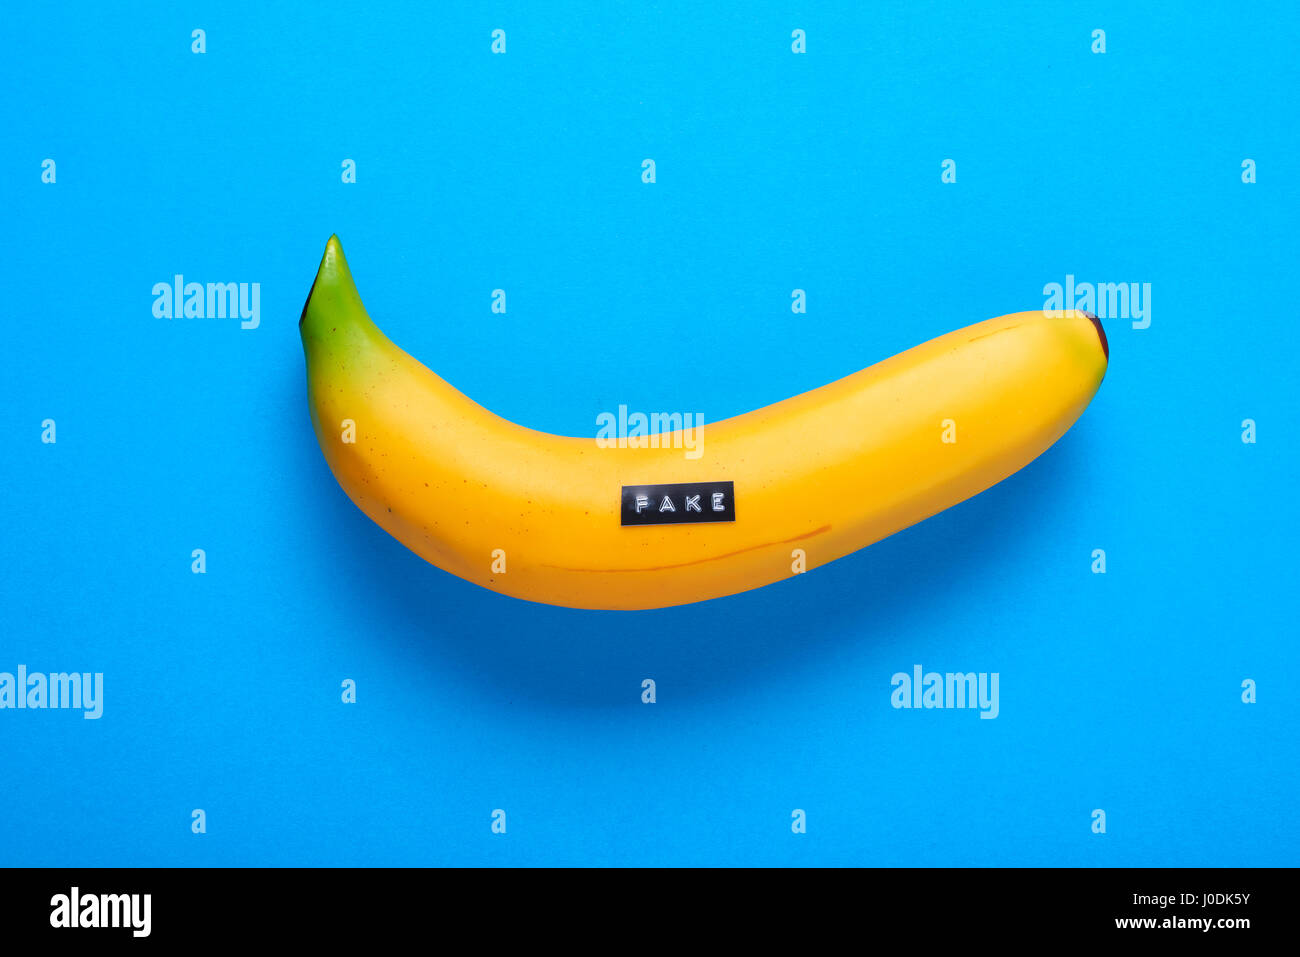 Fake plastic fruit - banana    - can be used for fake concept or fake news Stock Photo